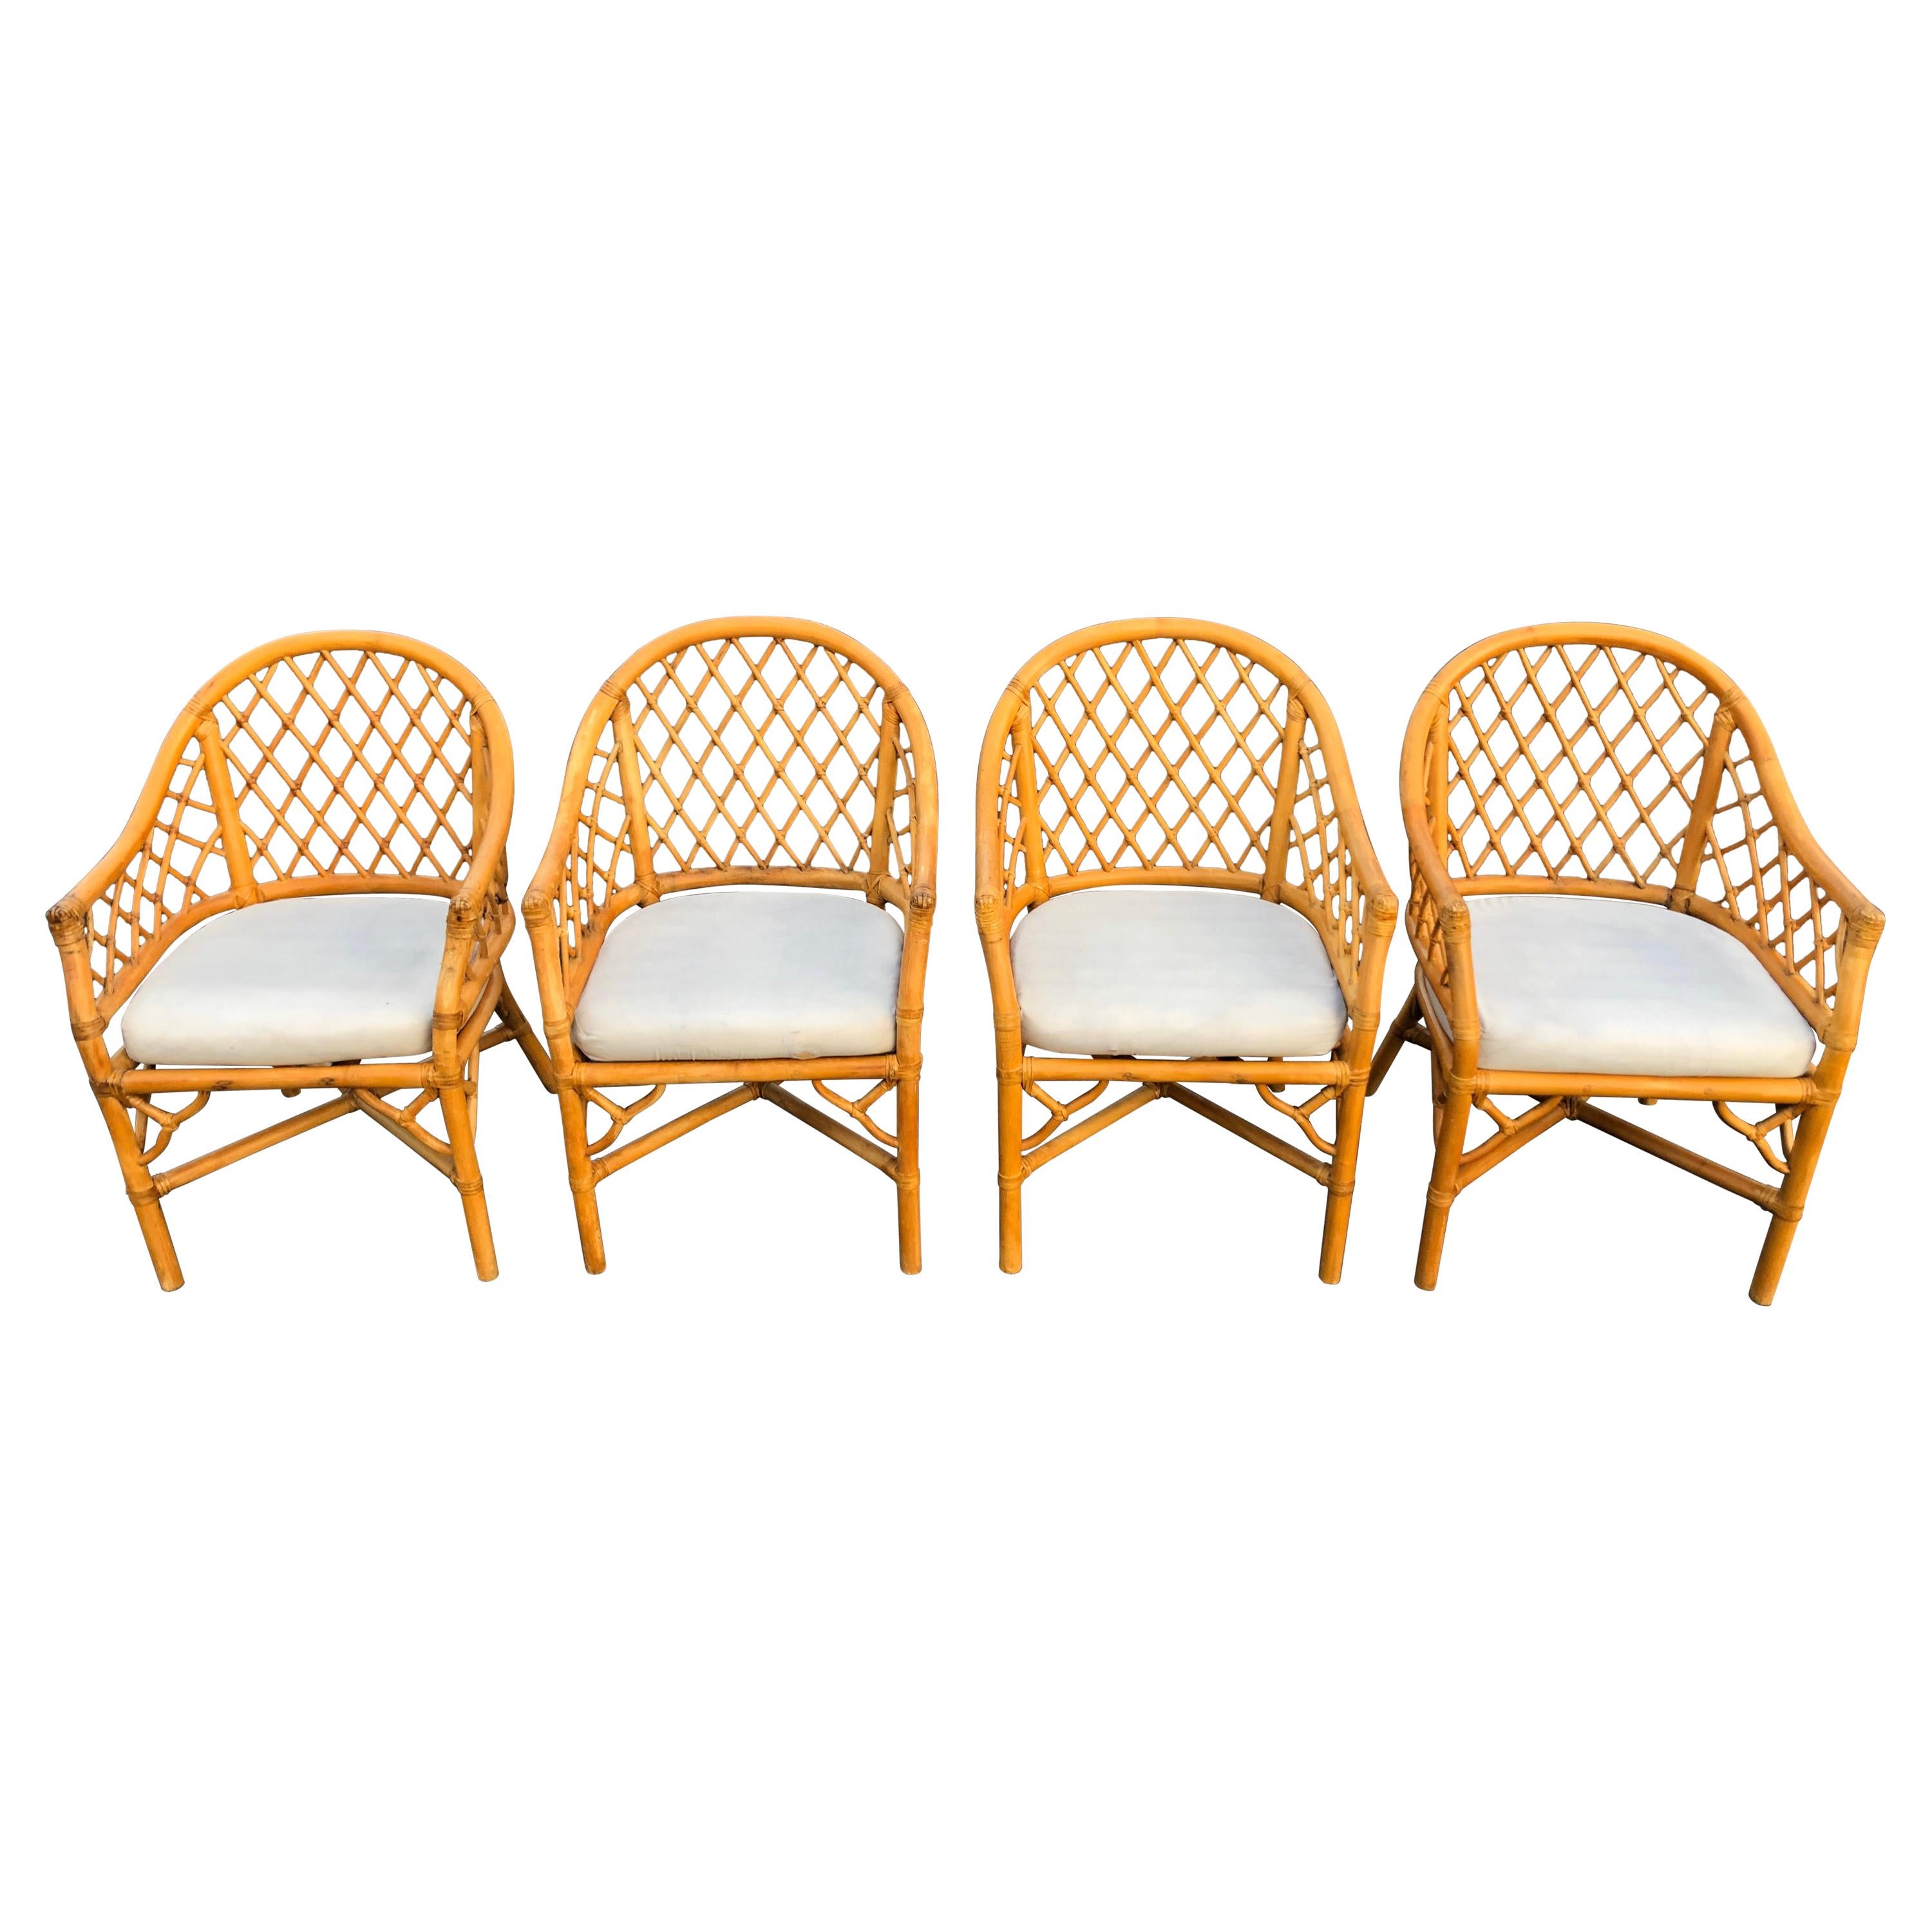 Set of Four Bamboo Chairs in the Style of of McGuire